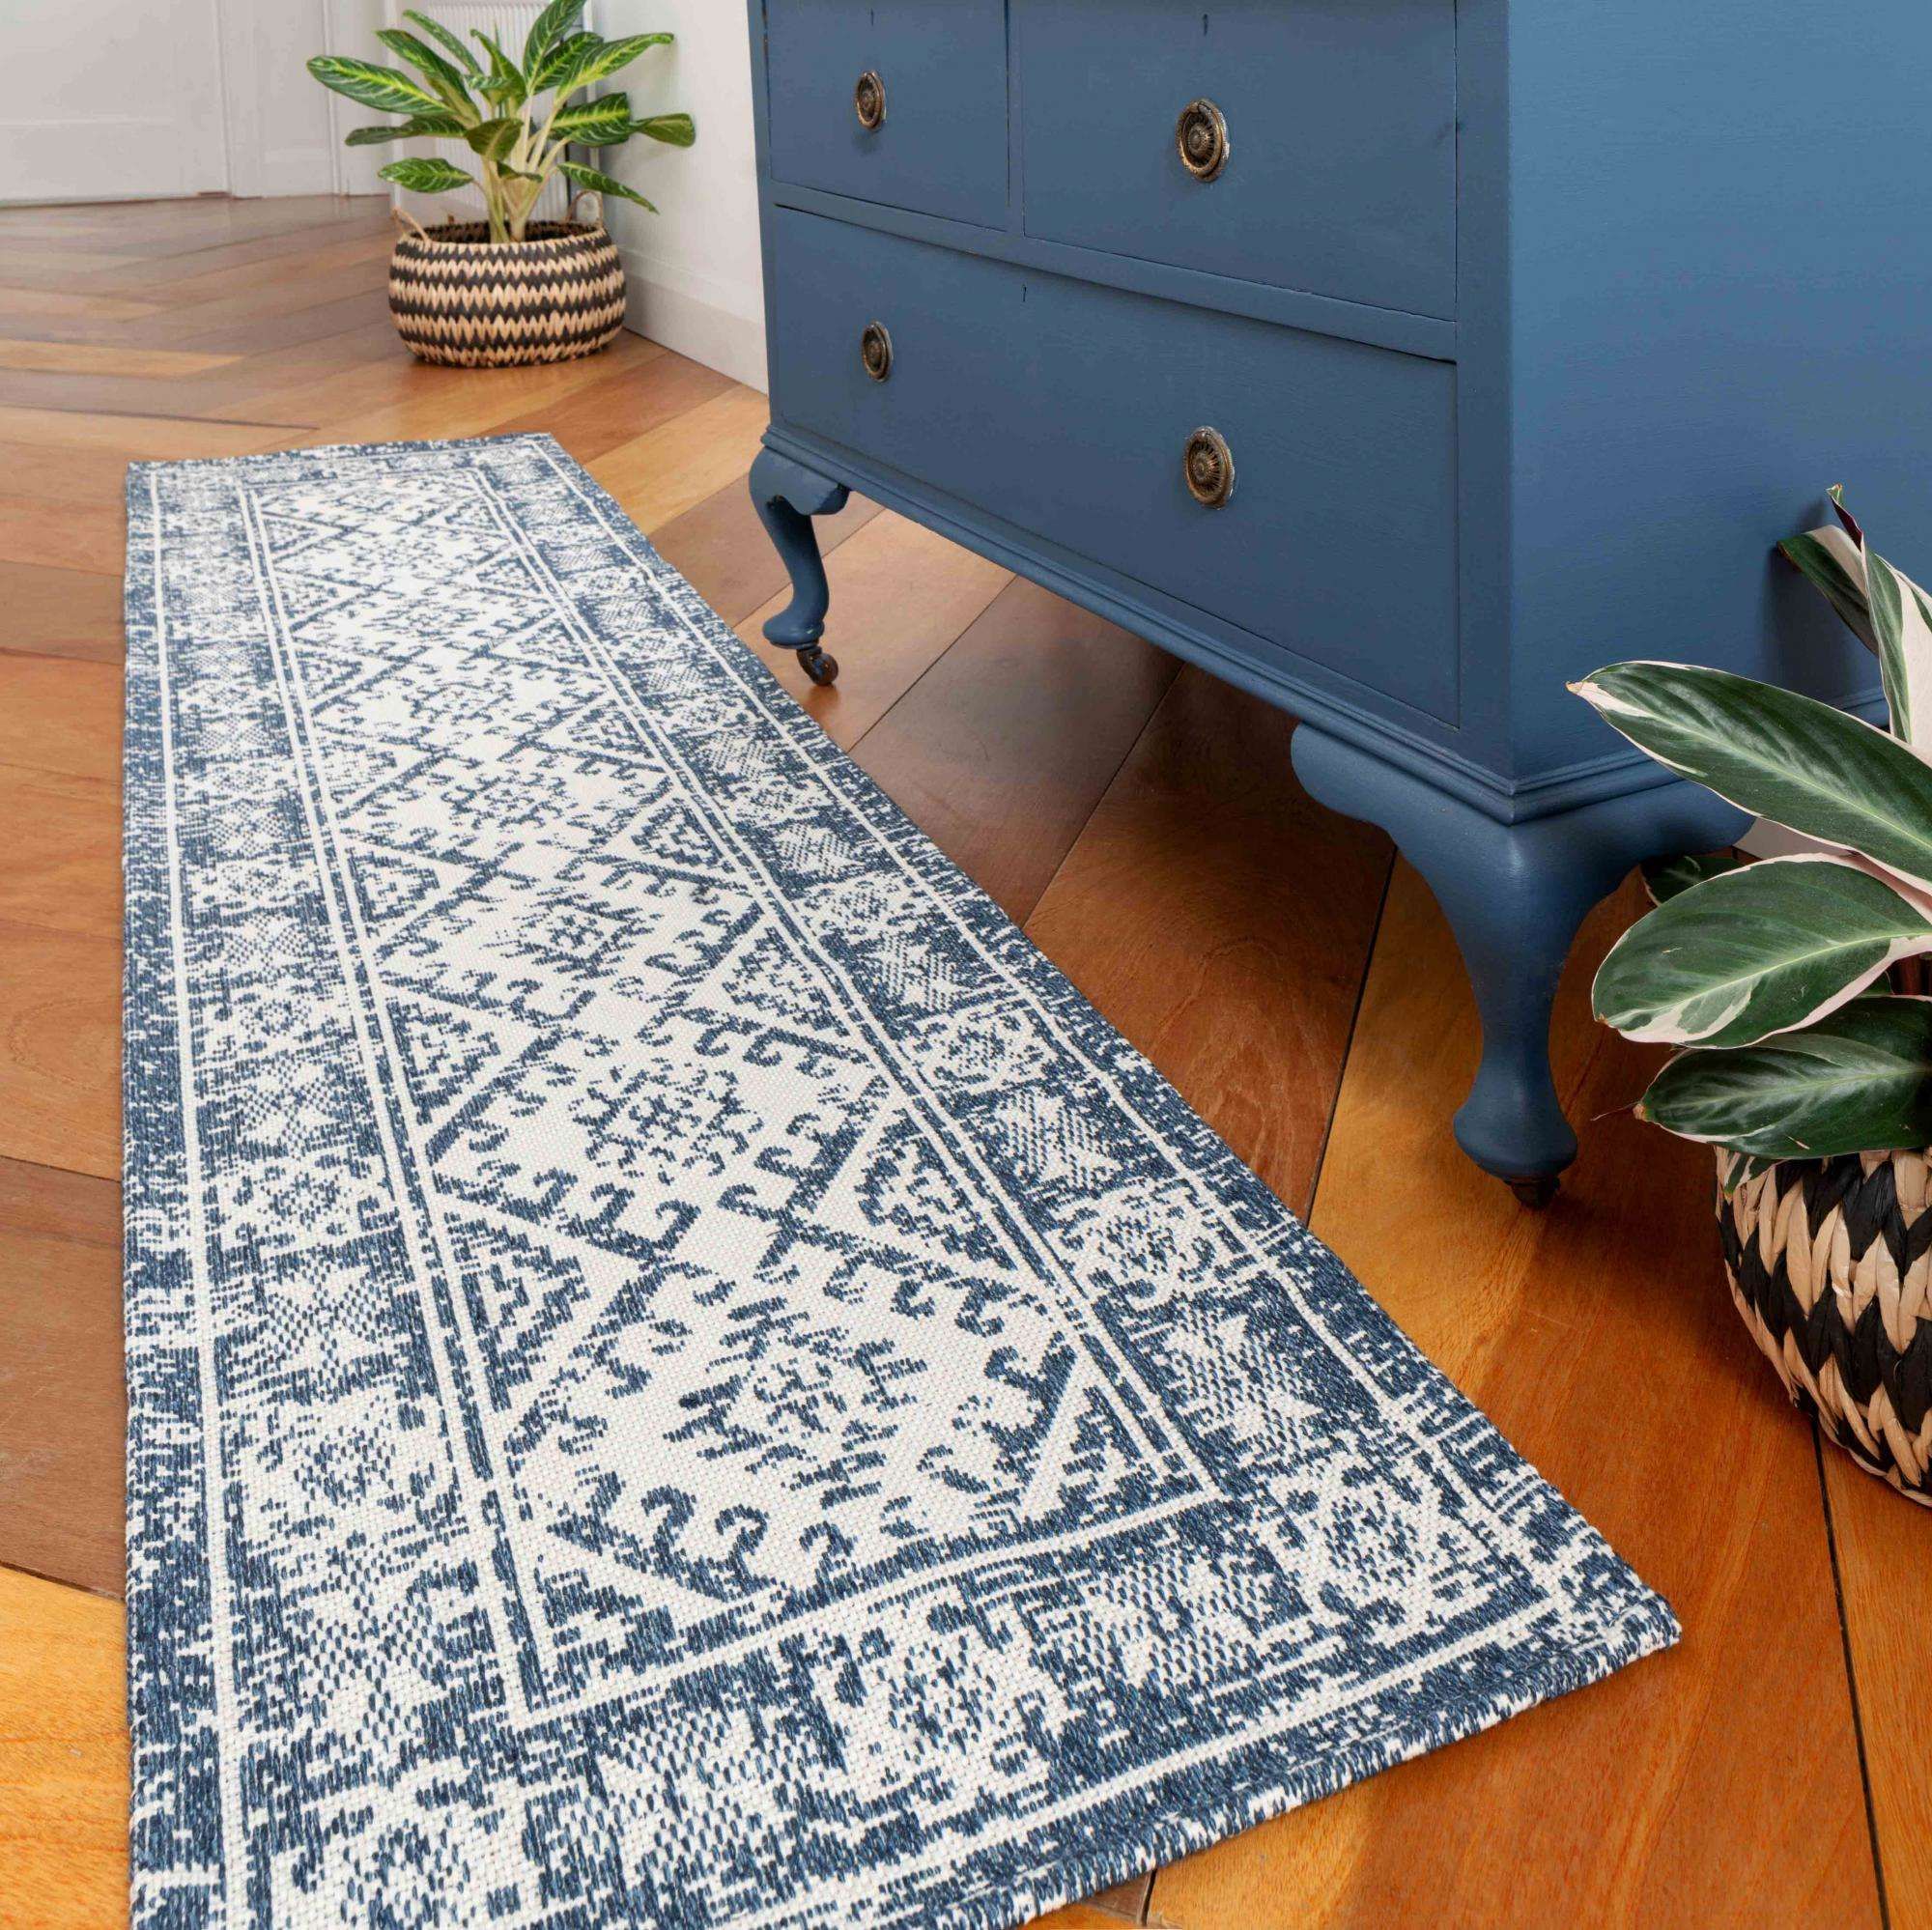 Distressed Vintage Blue Woven Sustainable Recycled Cotton Runner Rug |  Kendall | Kukoon Rugs Online Throughout Cotton Runner Rugs (View 3 of 15)